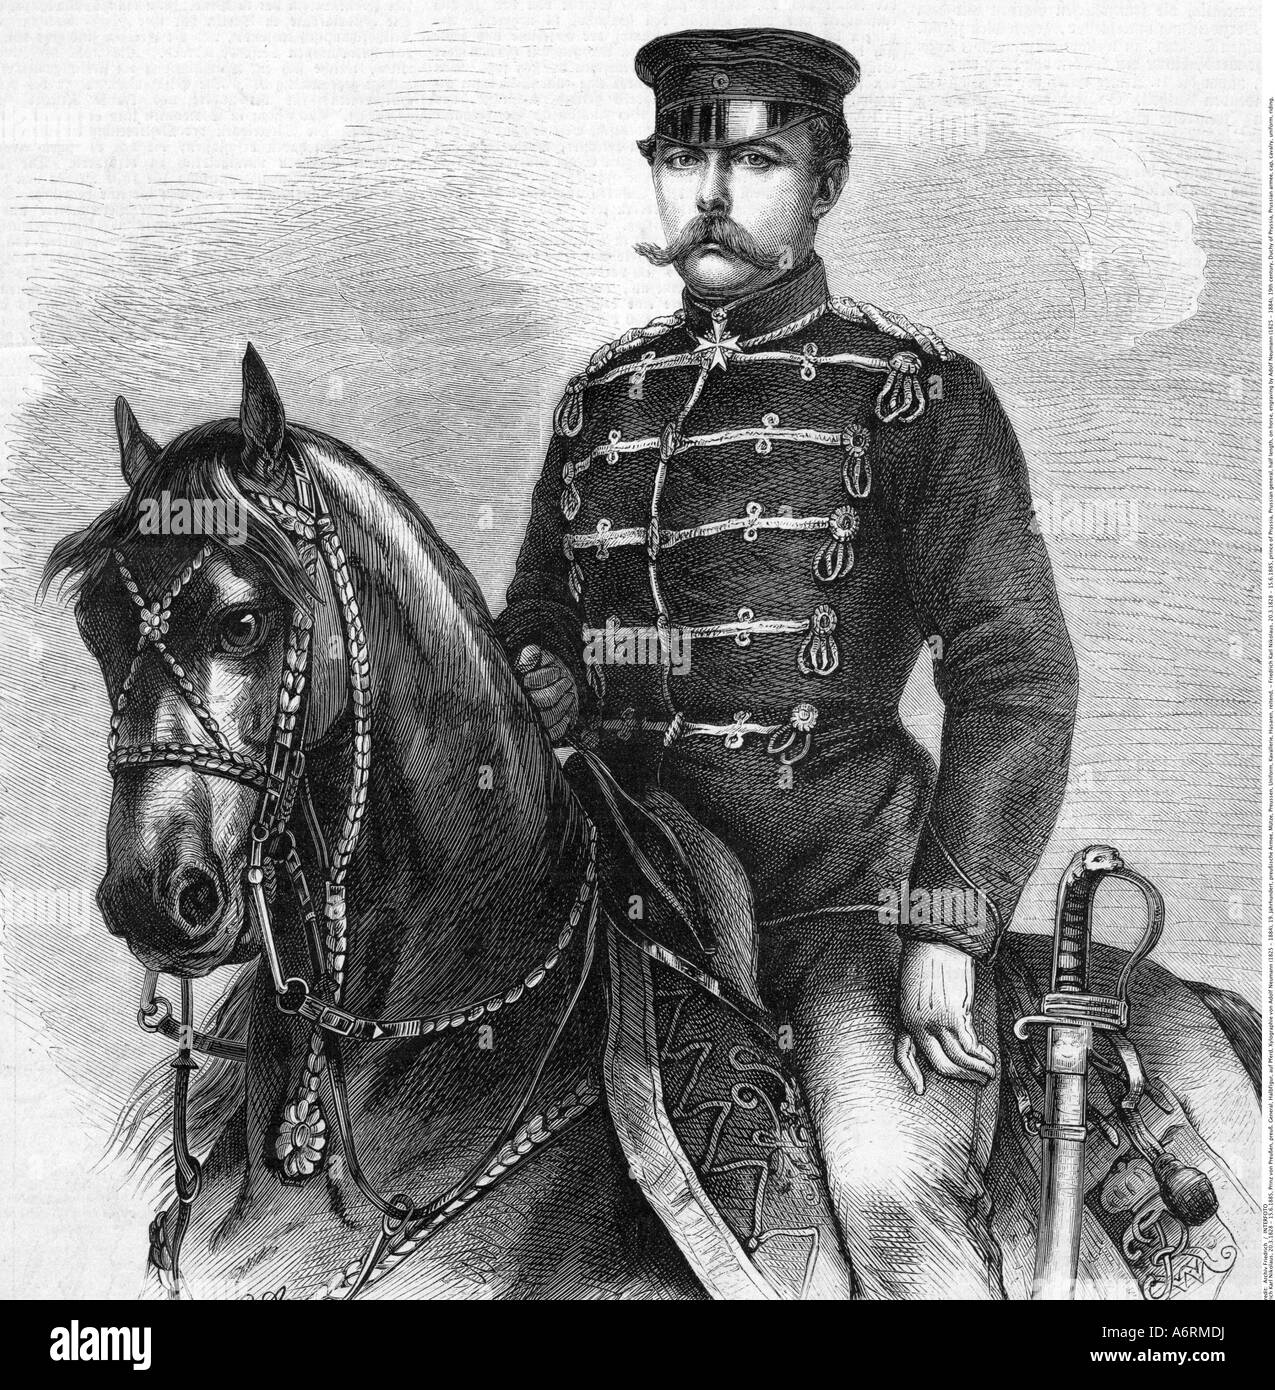 Frederick Carl Nicholas, 20.3.1828 - 15.6.1885, prince of Prussia, Prussian general, half length, on horse, engraving by Adolf N Stock Photo